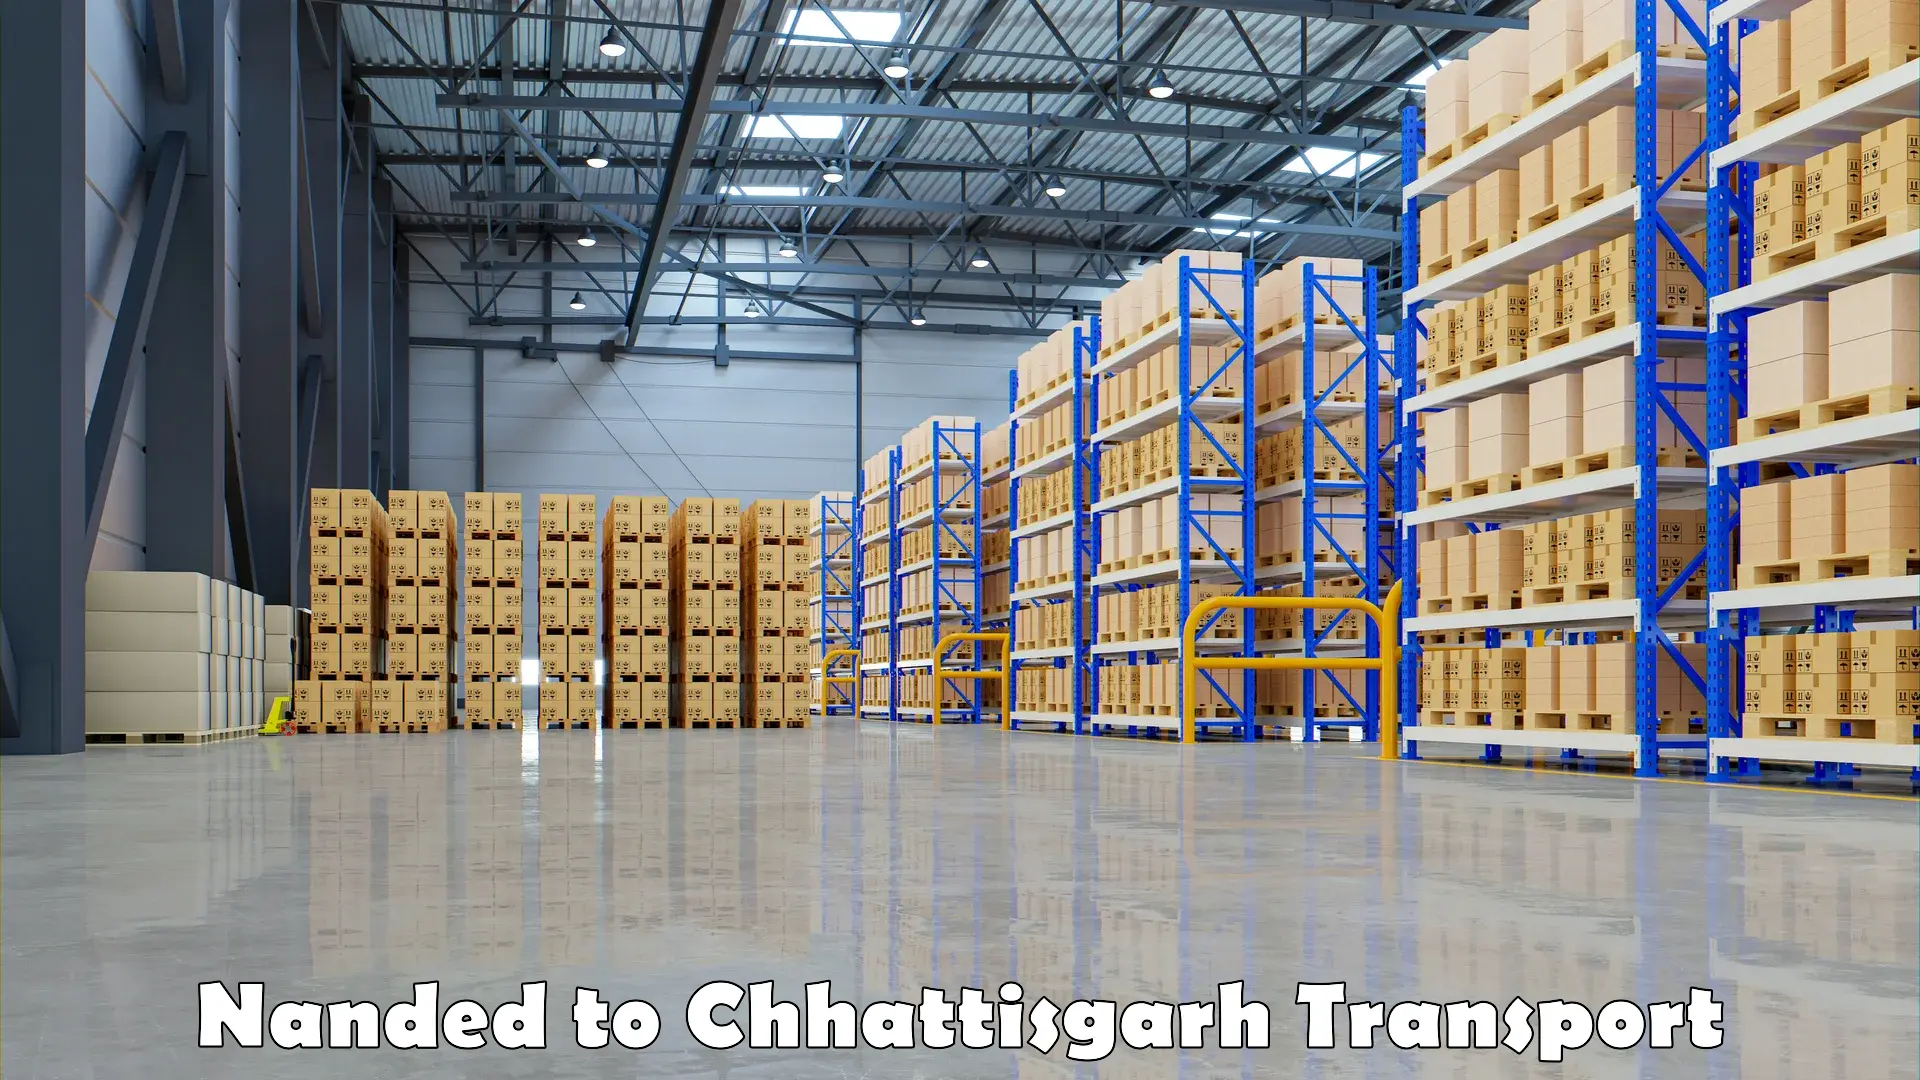 Truck transport companies in India Nanded to Chhattisgarh